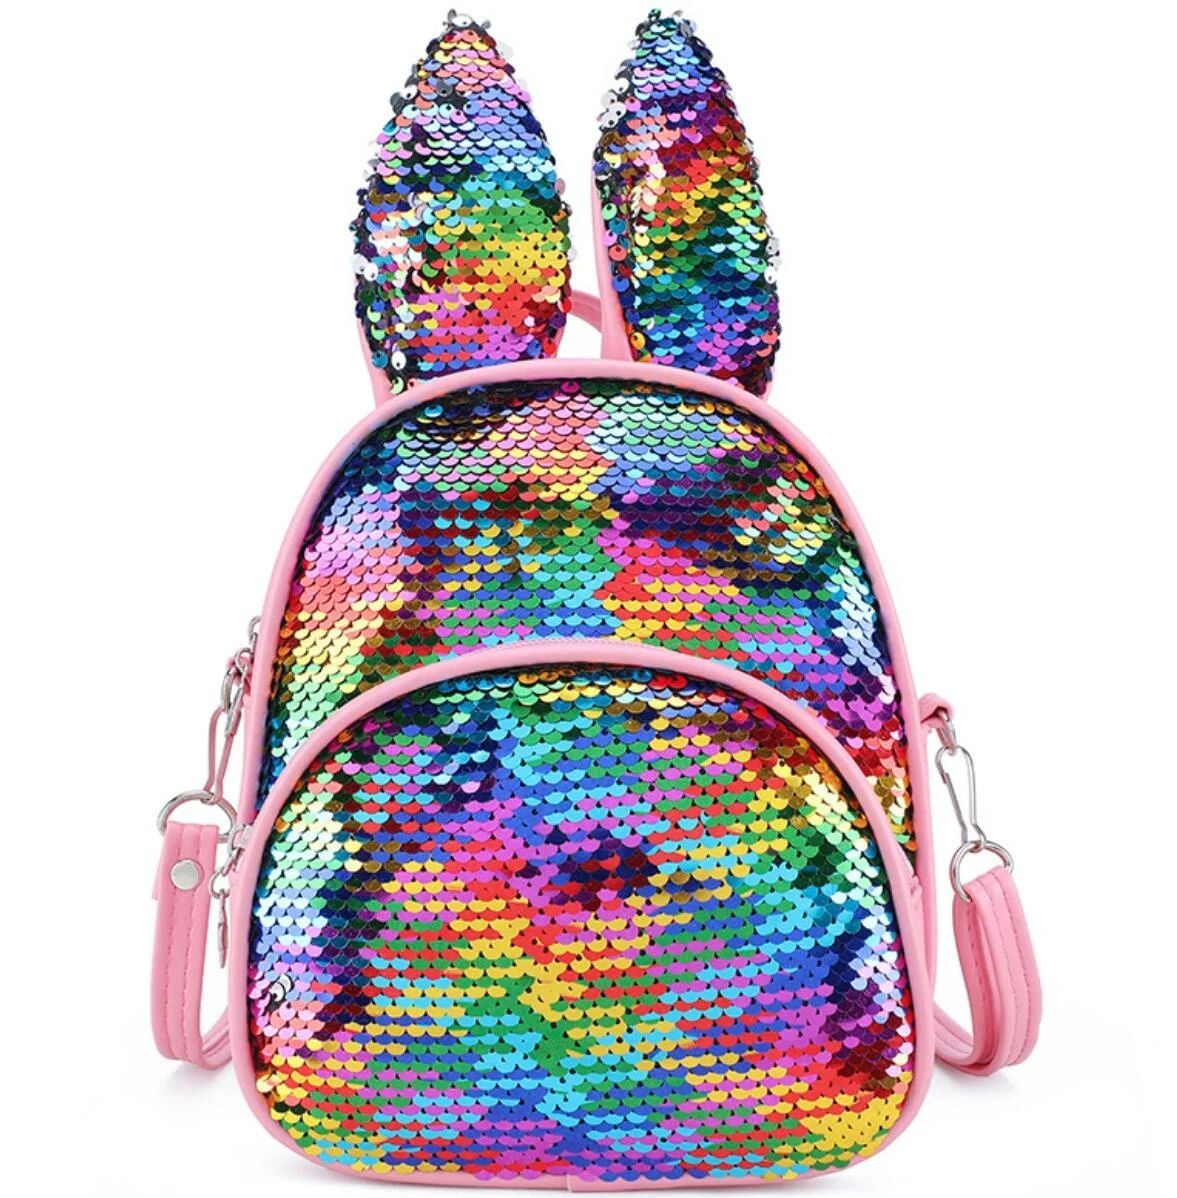 

Wholesale New Fashion Personality Sequined Bunny Ears Backpack Girls Bag Colorful All-match Travel Backpack for Kids, Same as main picture